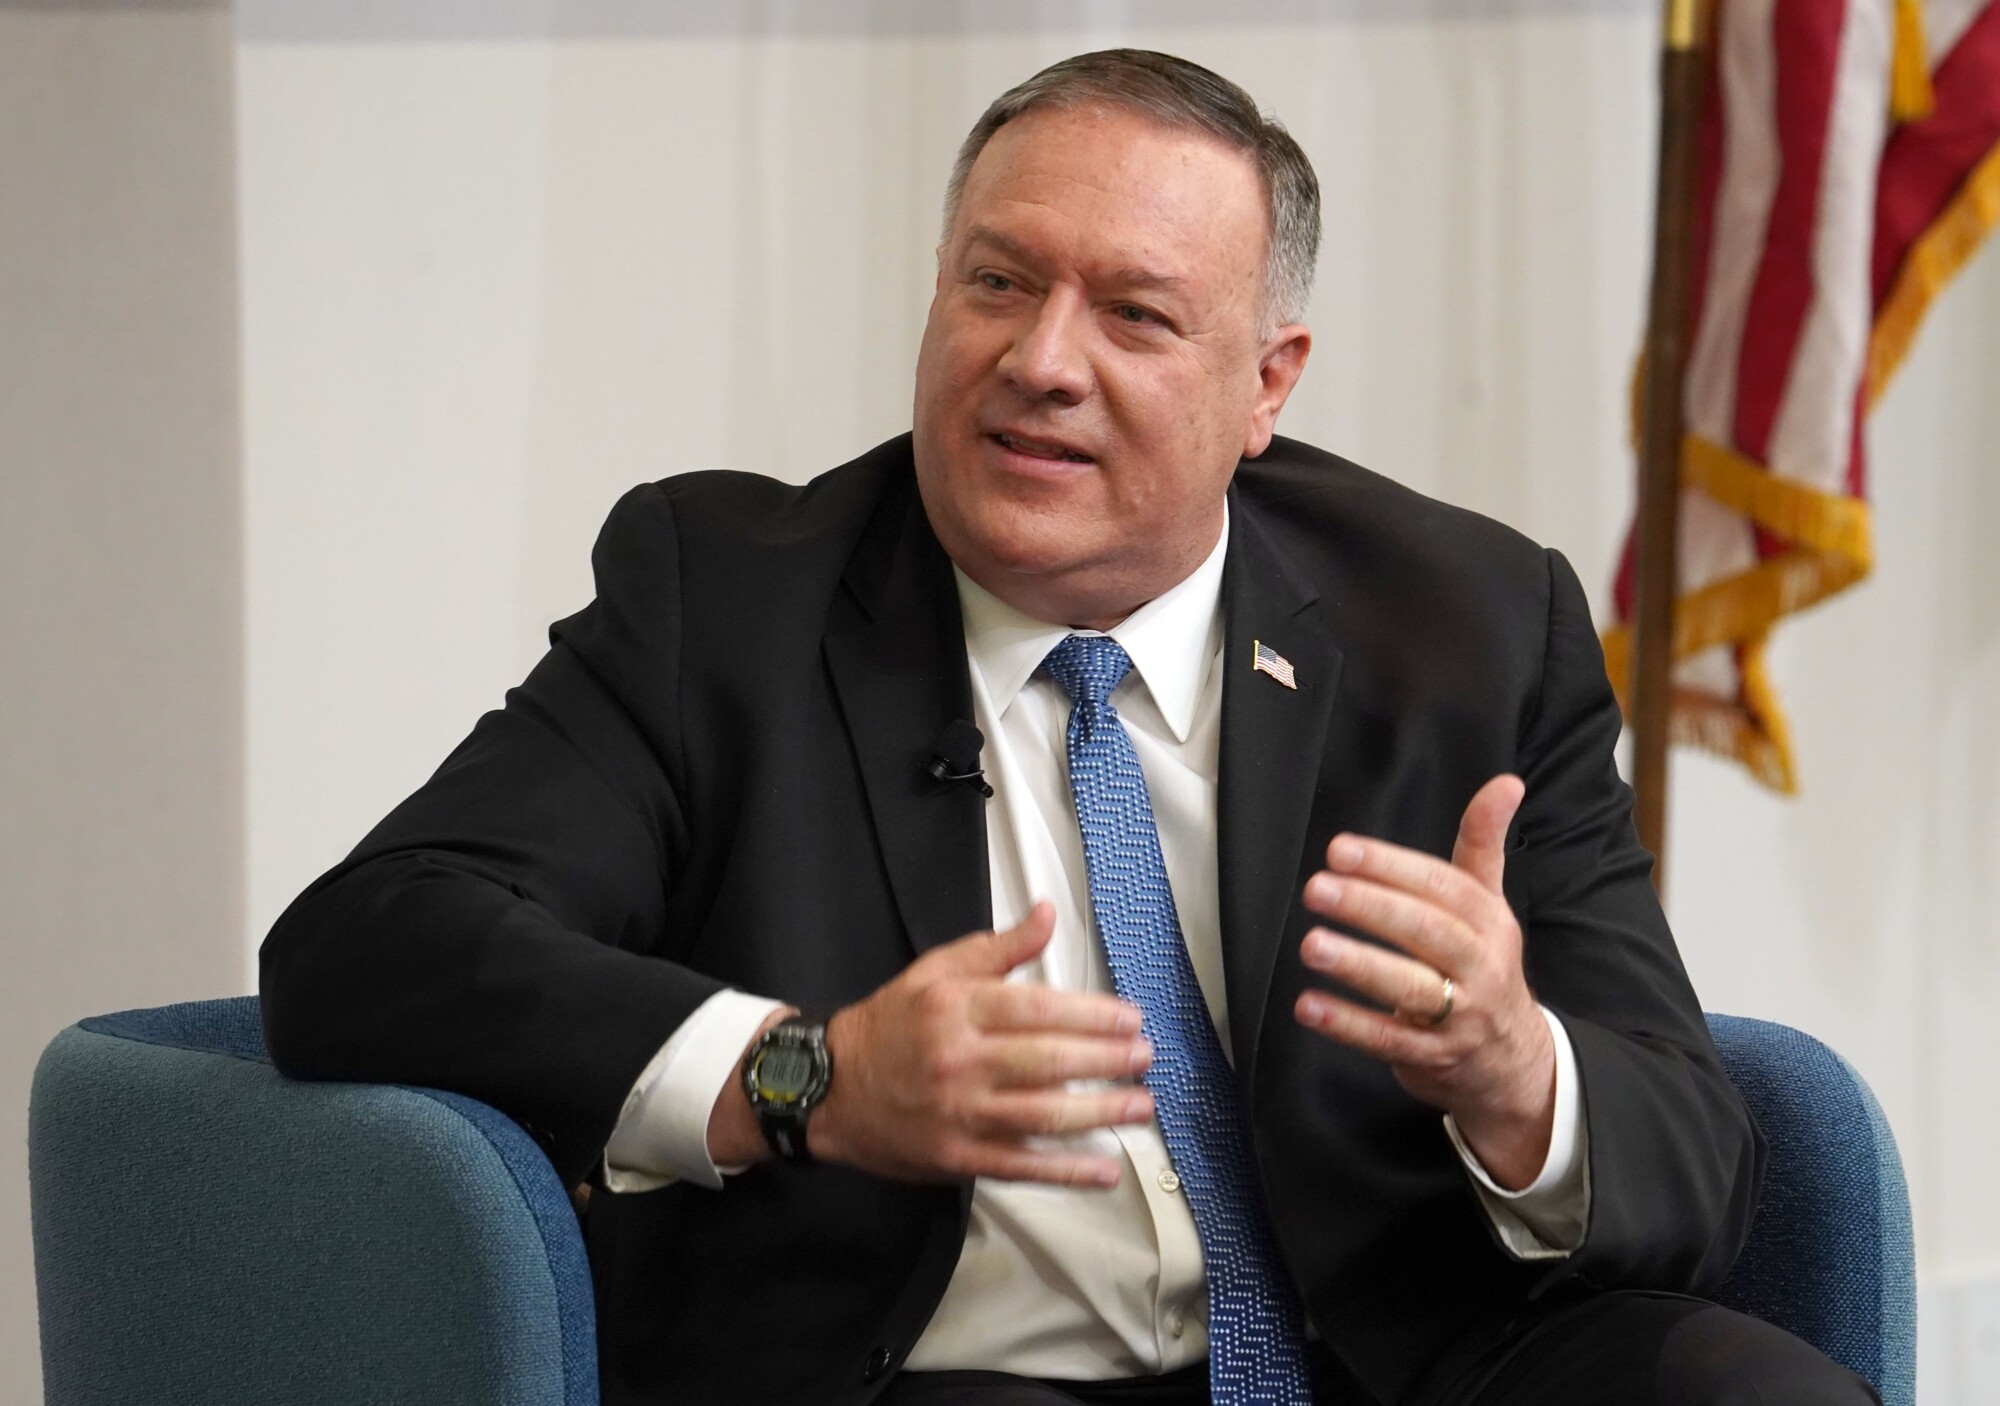 Pompeo Calls on Biden to Acknowledge CCP’s Role in Pandemic After Memo Release